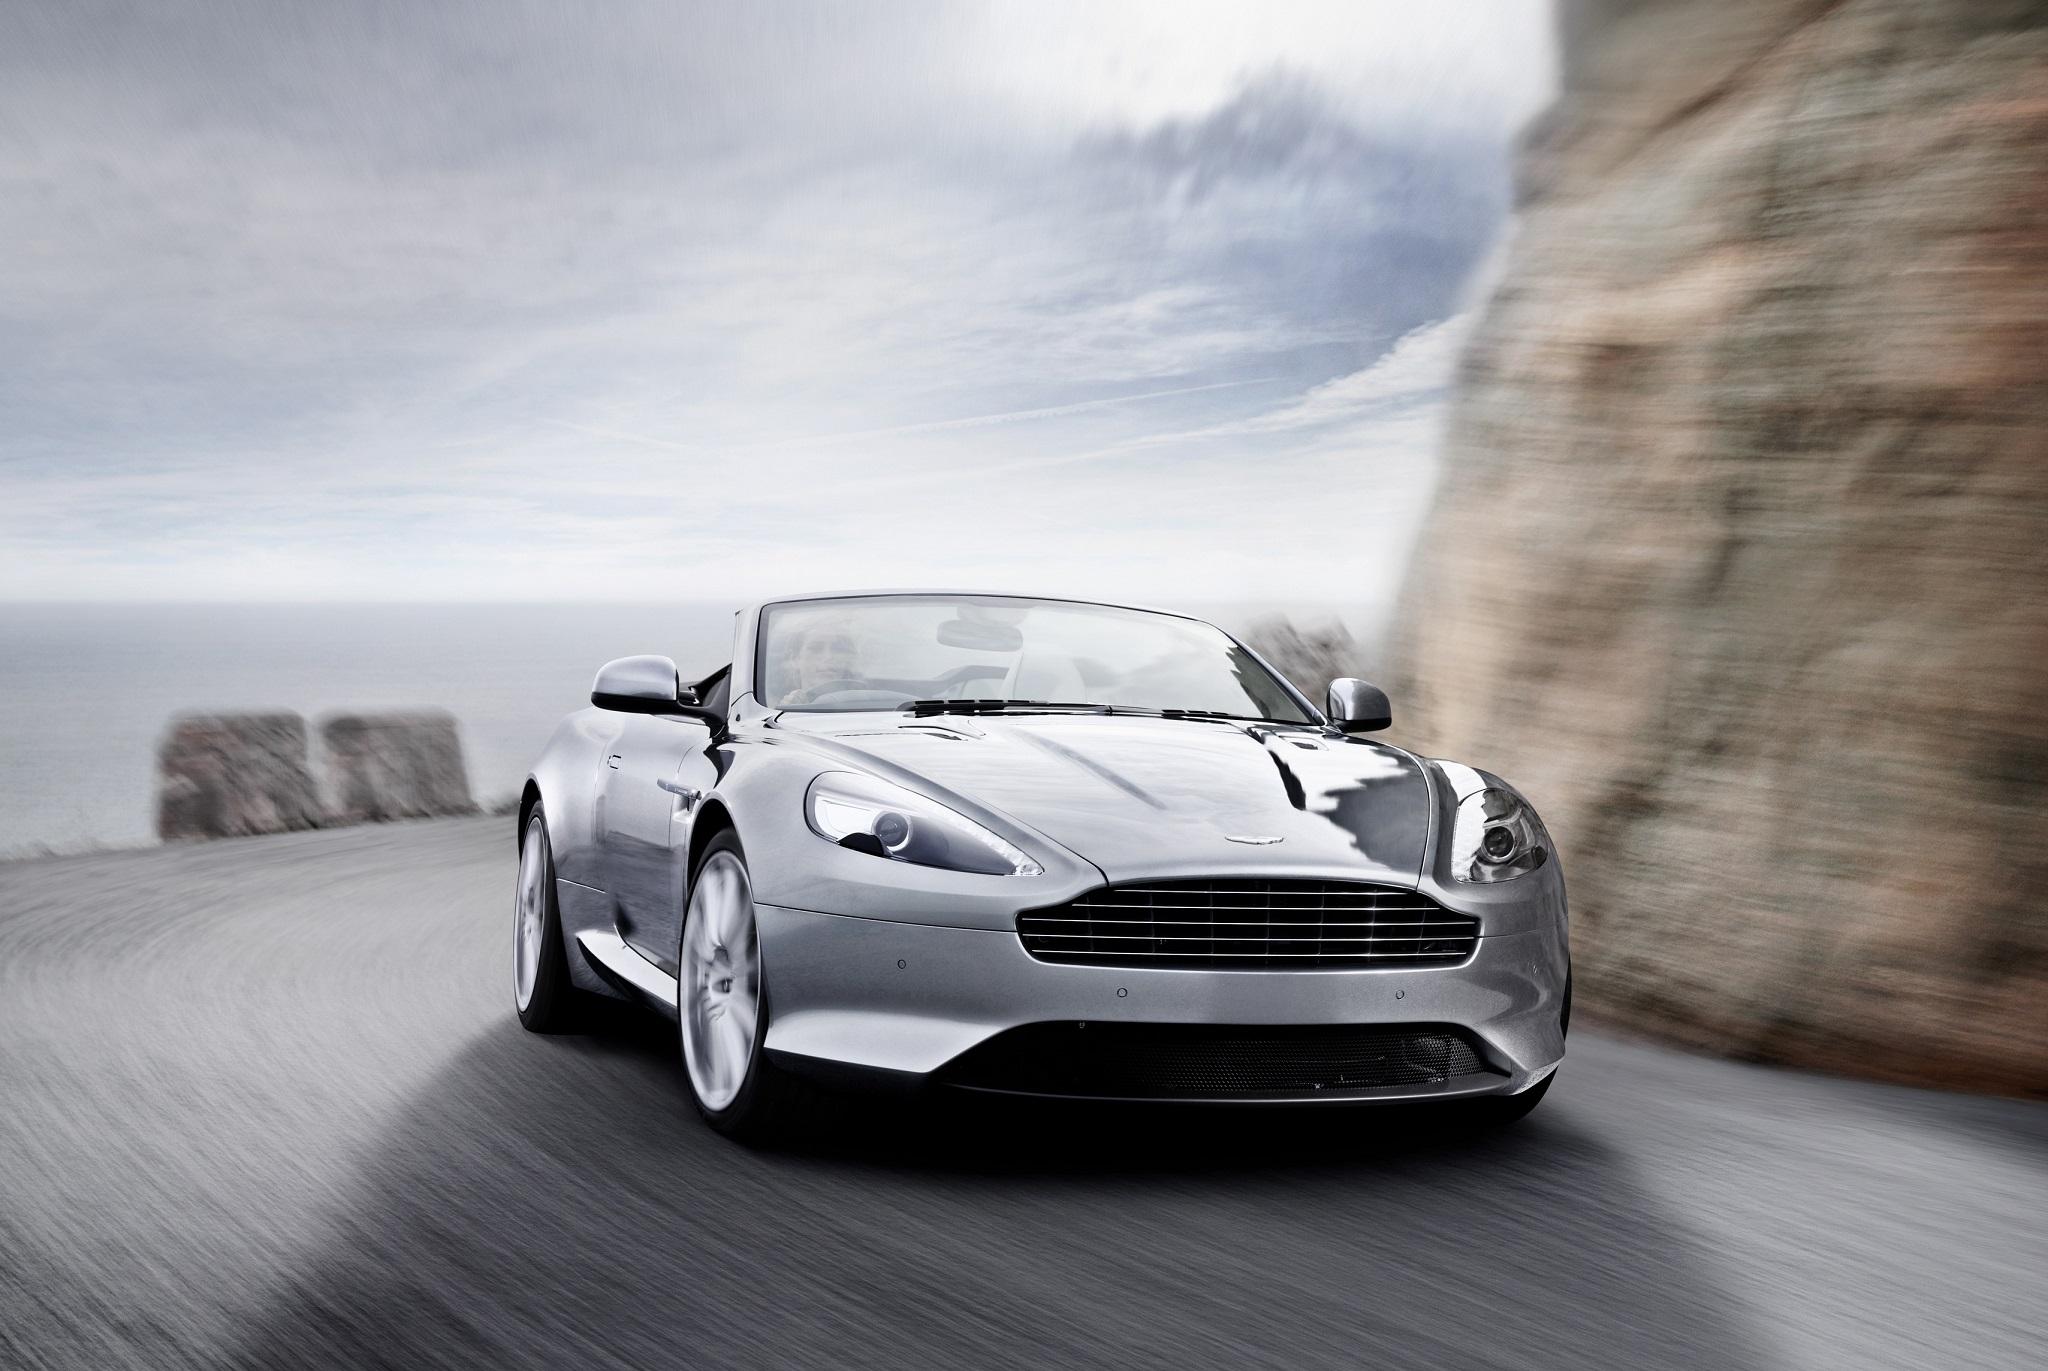 Everyone secretly wants an Aston Martin, even if they don't know much about cars